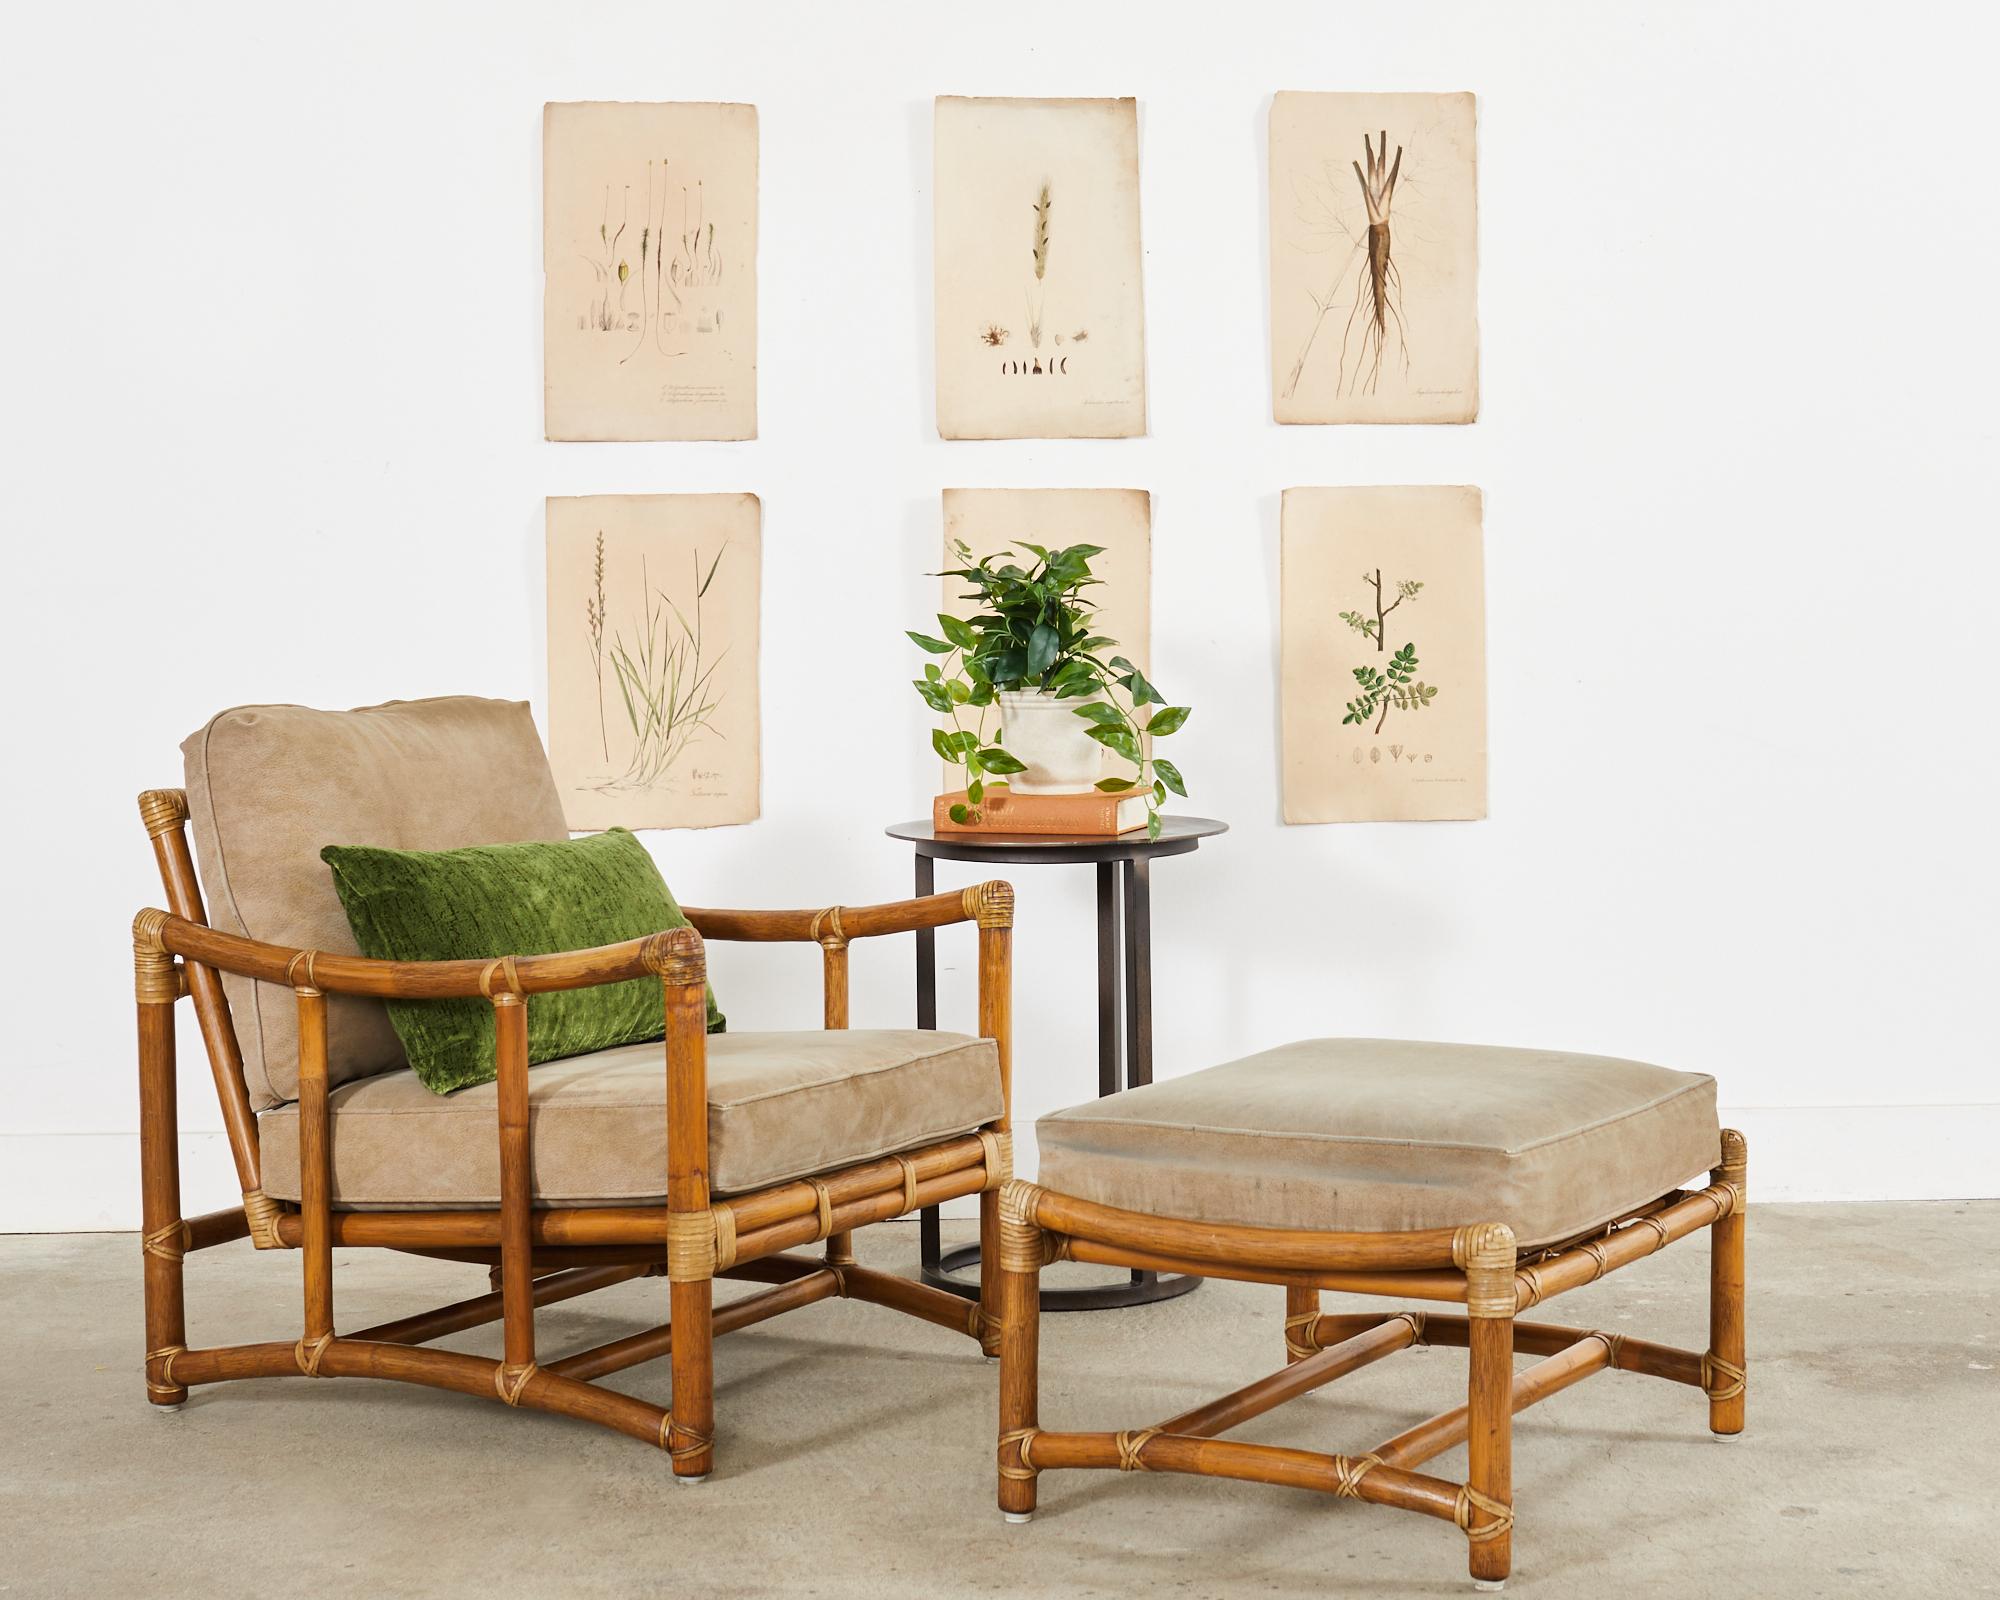 Distinctive and rare bent pole rattan lounge chair and matching ottoman made in the California coastal organic modern style by McGuire. The pair feature gracefully curved bent rattan frames with upswept arms and arched legs. The thick rattan is